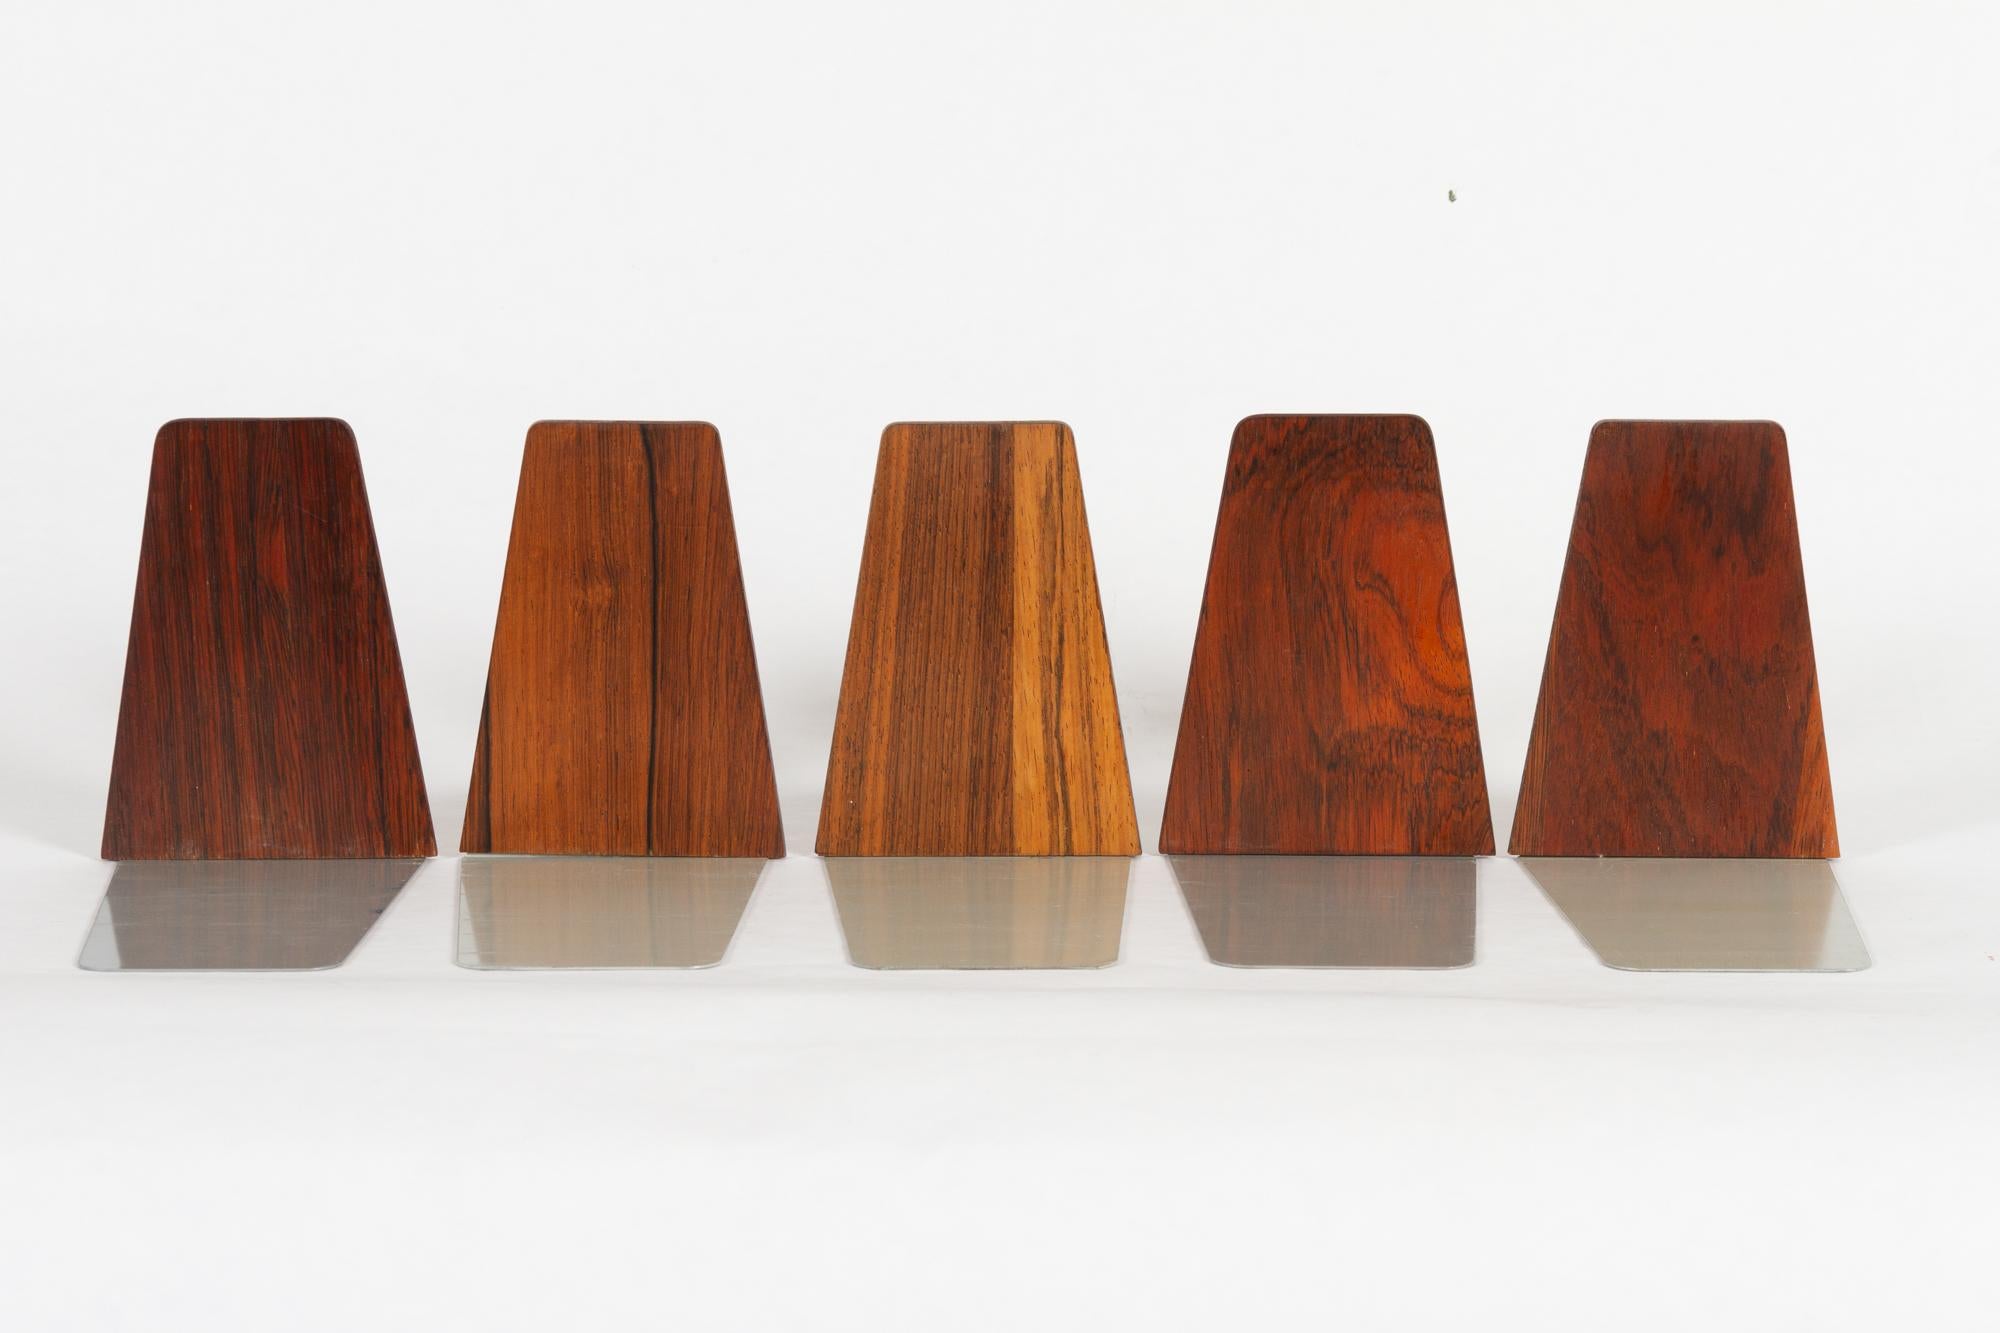 Danish Midcentury Bookends by Kai Kristiansen for FM 1960s, Set of 5